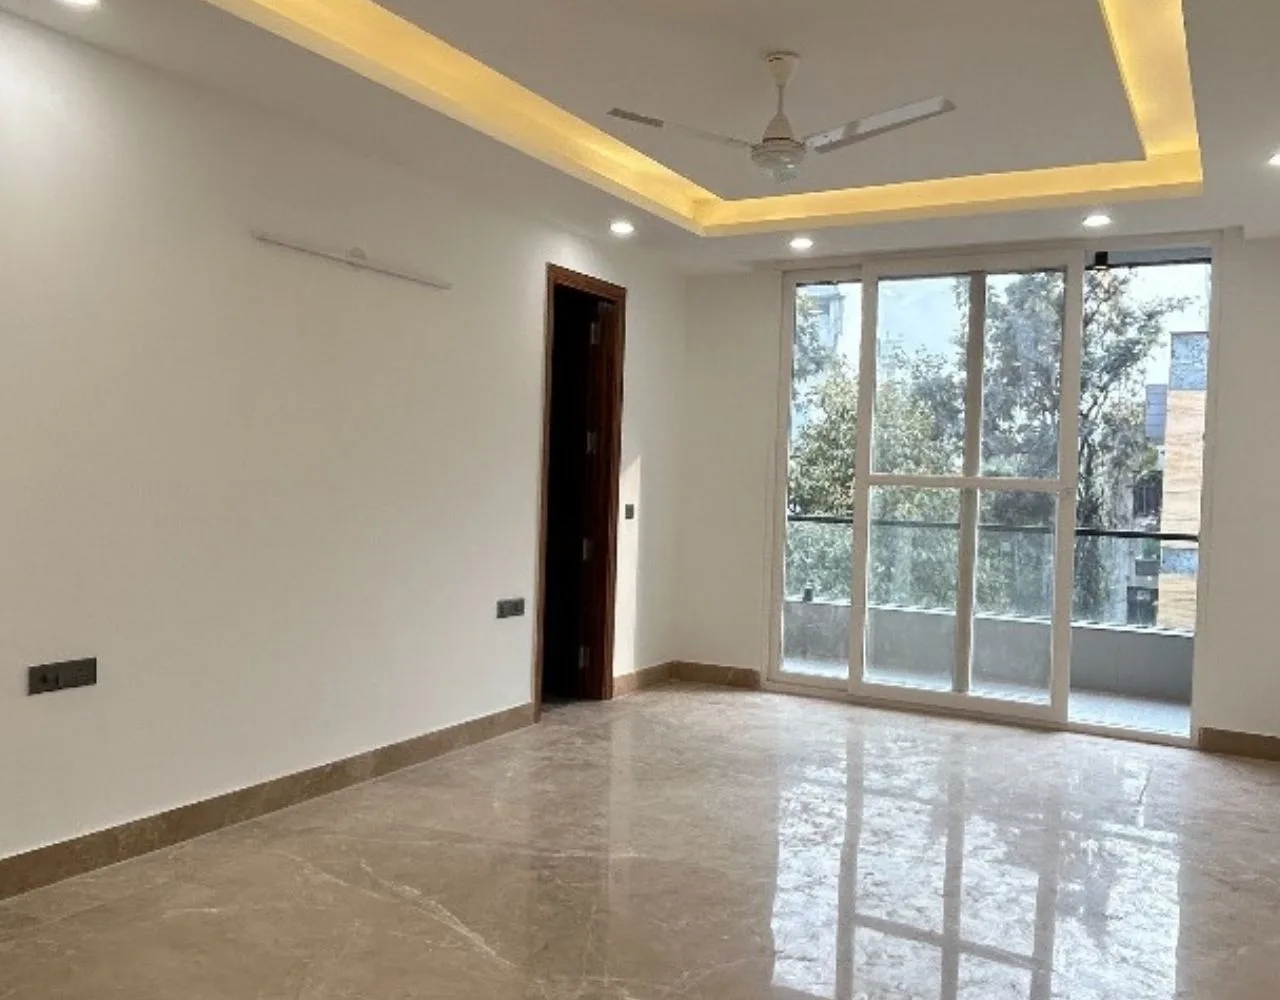 Residential Flats In South Delhi